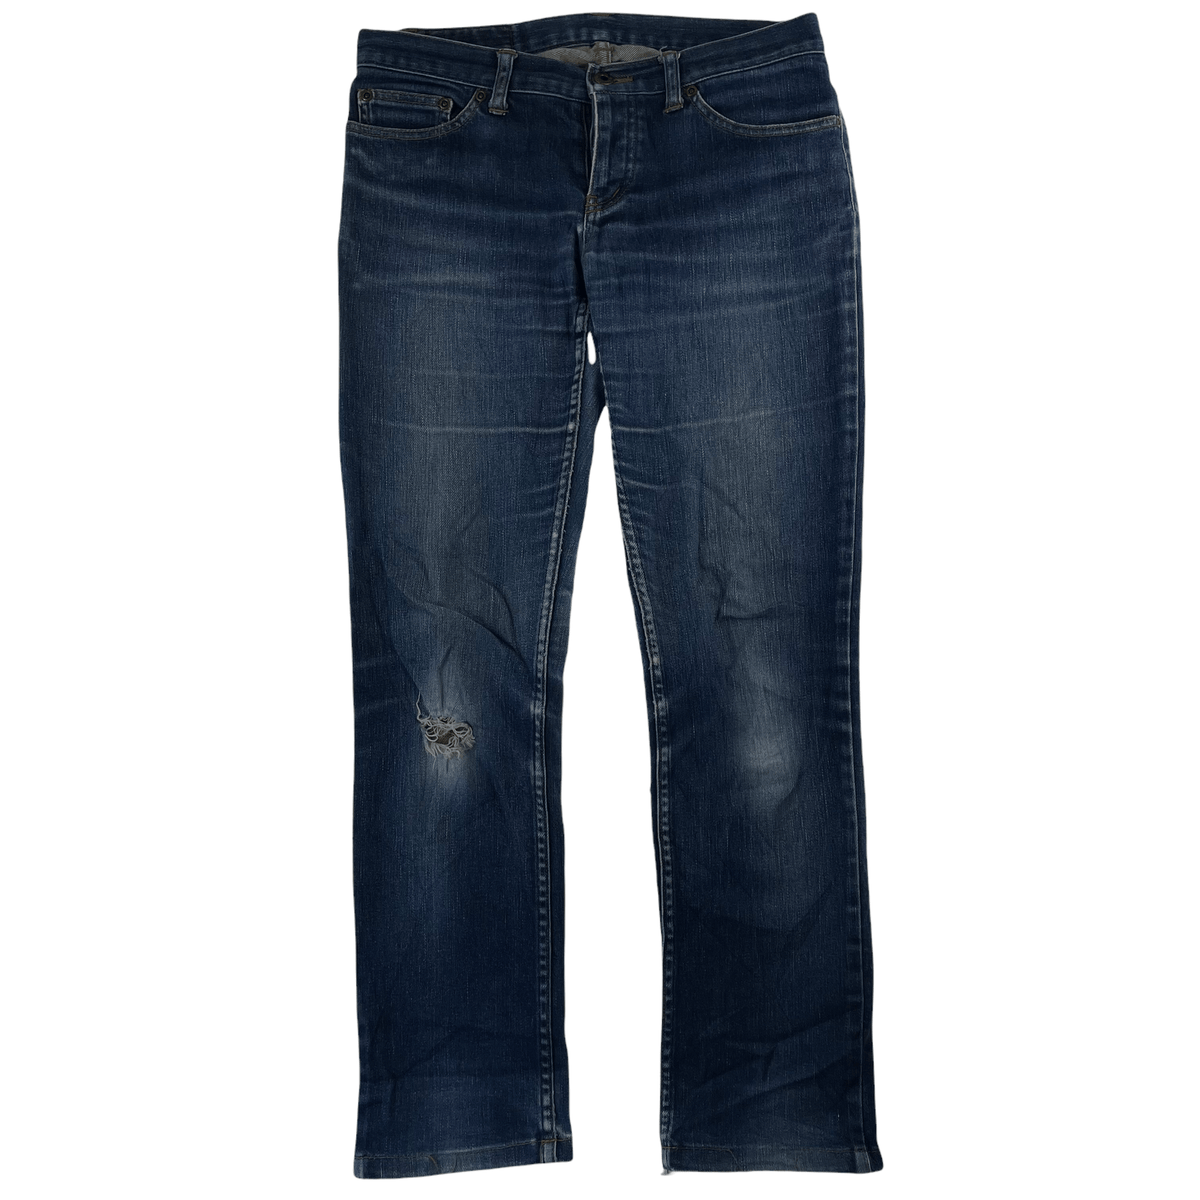 Hysteric Glamour denim jeans trousers W32 - second wave vintage store